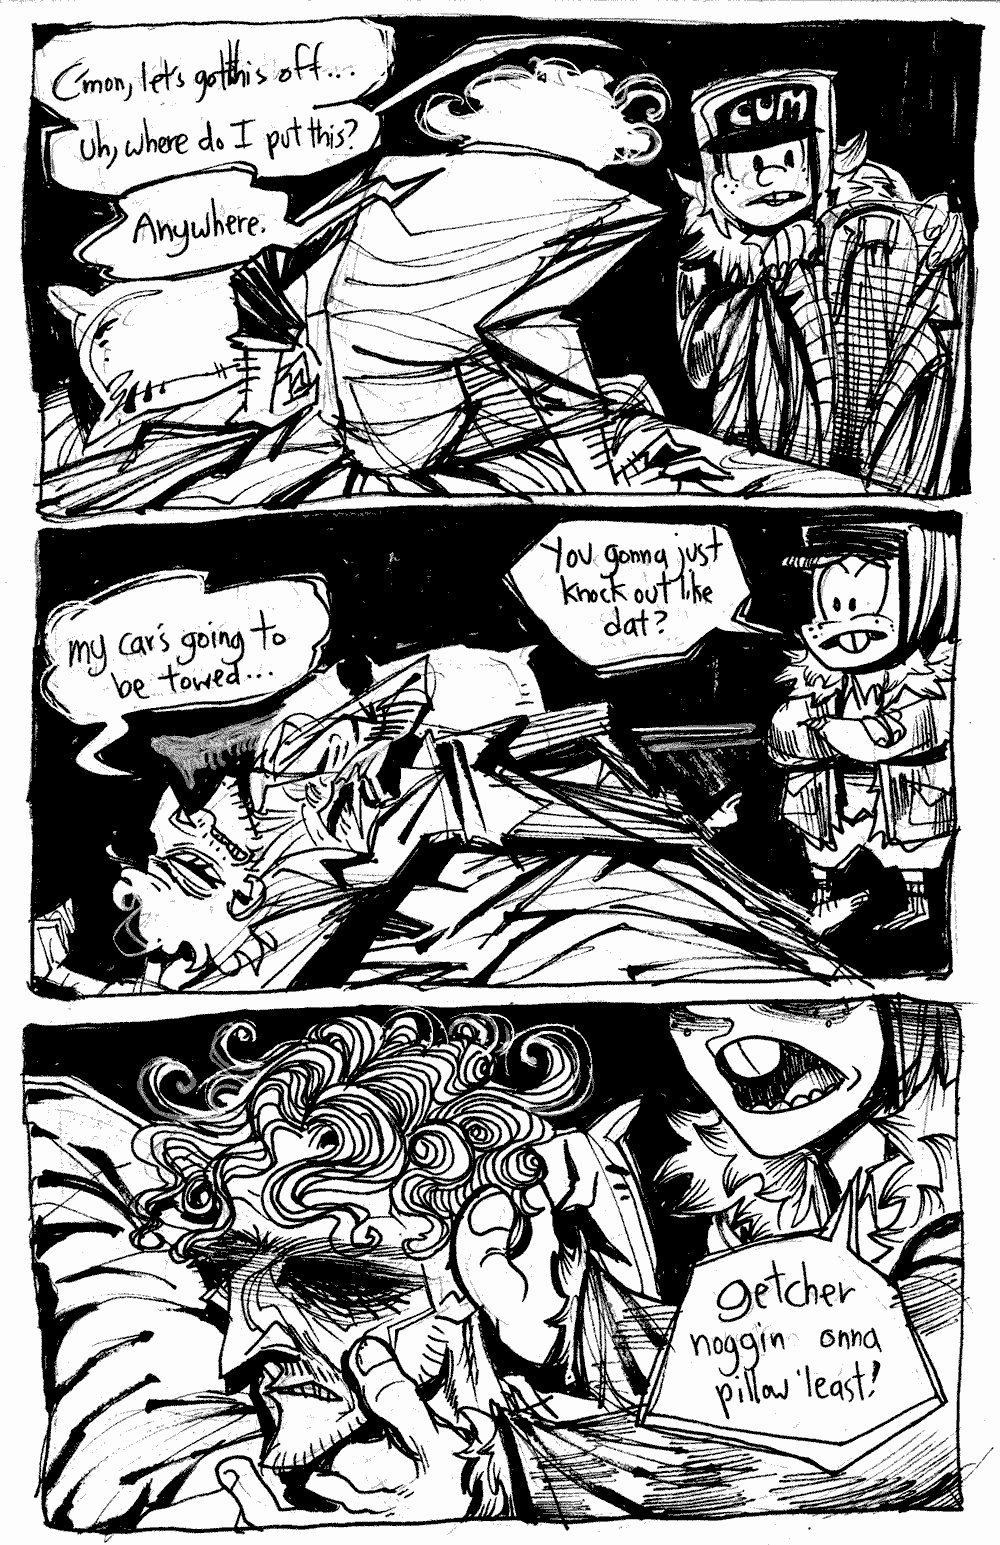 Page 26 - Basile sits on the bed, and Ollie takes his jacket off.  'C'mon, let's get this off...uh, where do I put this?'.  Basile says 'Anywhere.'.  Basile lays down on his back.  'My car's going to be towed.  Ollie asks, 'You gonna just knock out like dat?'  He adjusts Basile so his head is on a pillow.  'Getcher noggin onna pillow 'least!'